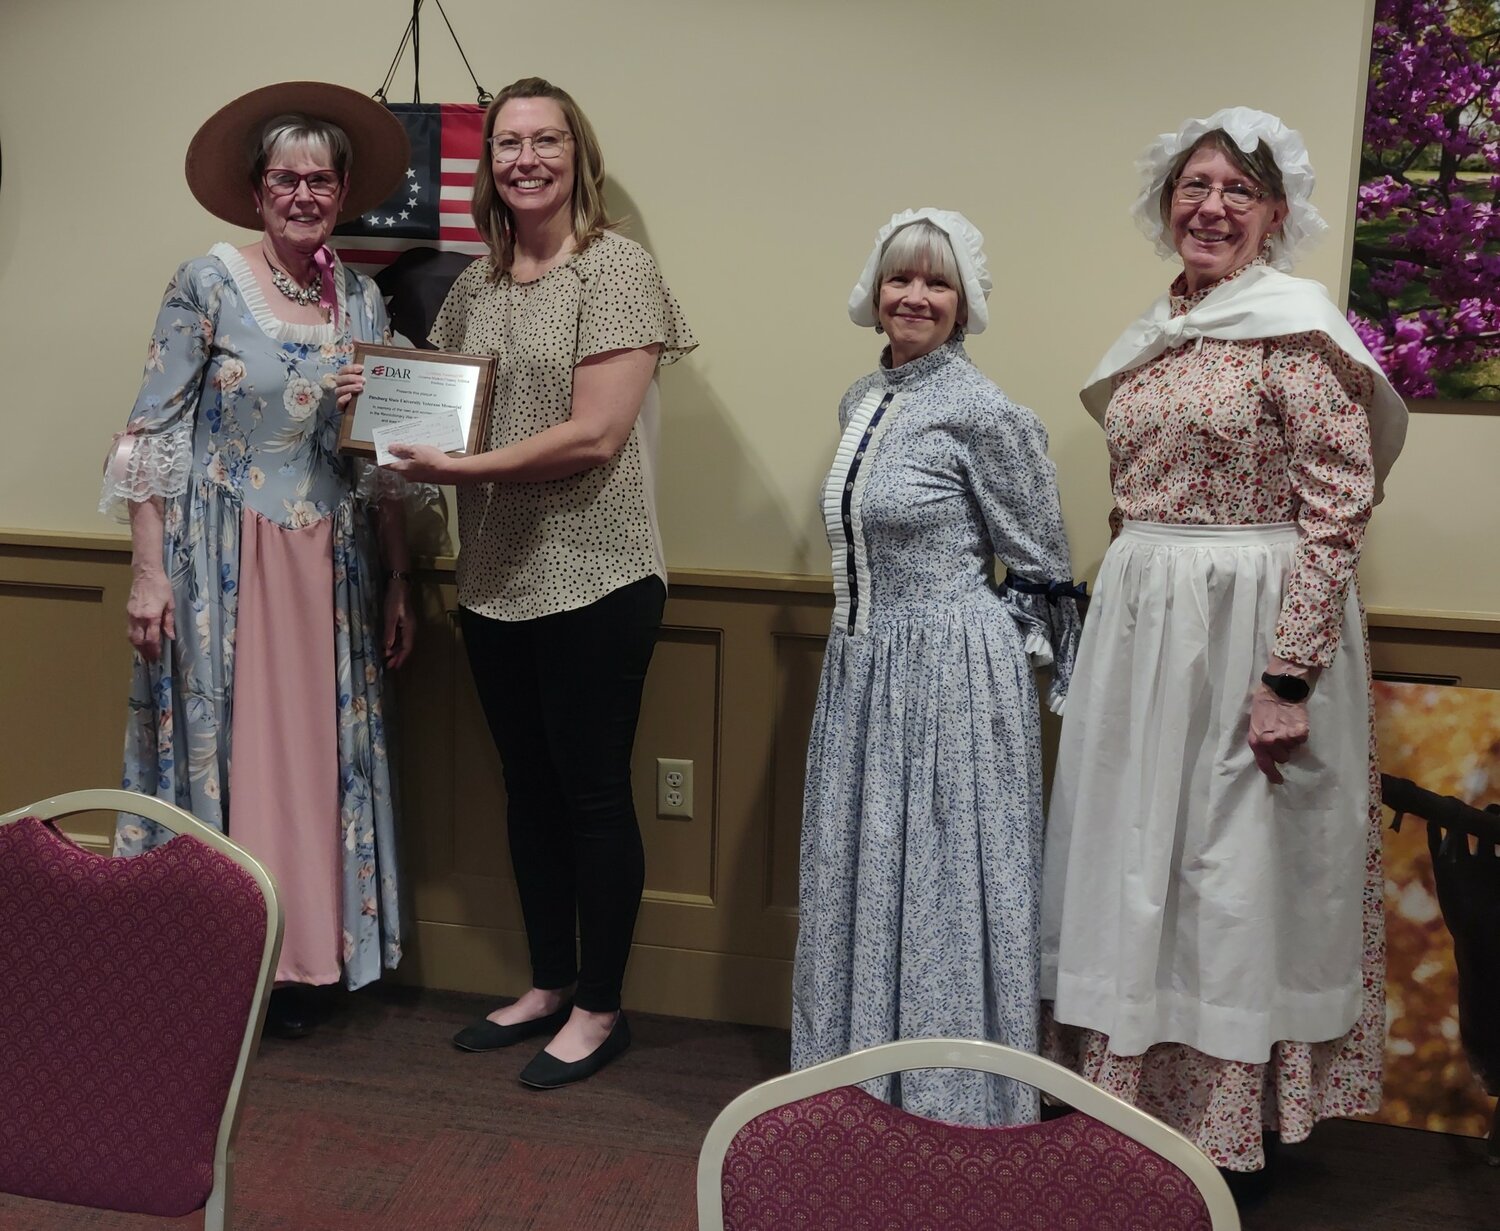 As the country approaches its 250th birthday, the Oceanus Hopkins Chapter of the Daughters of the American Revolution presented an America 250 Celebration Grant to Pittsburg State University in the amount of $500 to purchase American flags to be flown at the Veterans’ Memorial in Pittsburg. Pictured, from left, are Mary Gilpin; Becky McDaniel, Associate VP for University Advancement; Donita Dupslaff; and Linda Shultz.